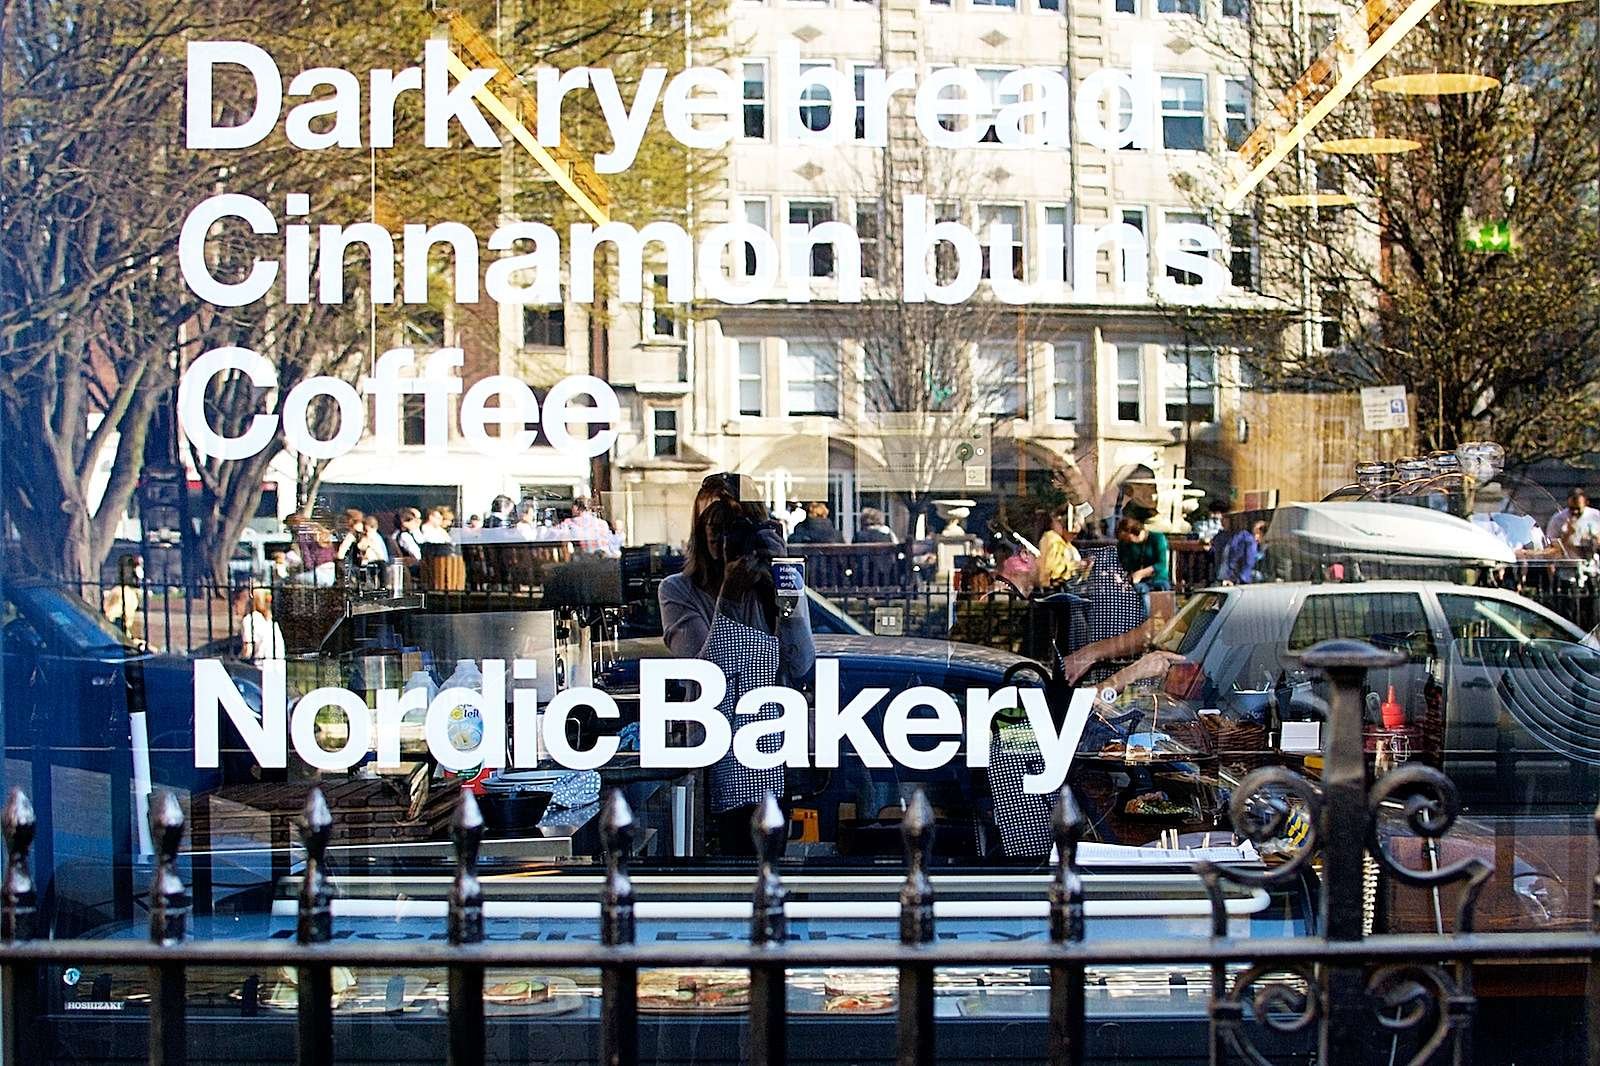 Nordic Bakery at the Golden Square in Soho, London